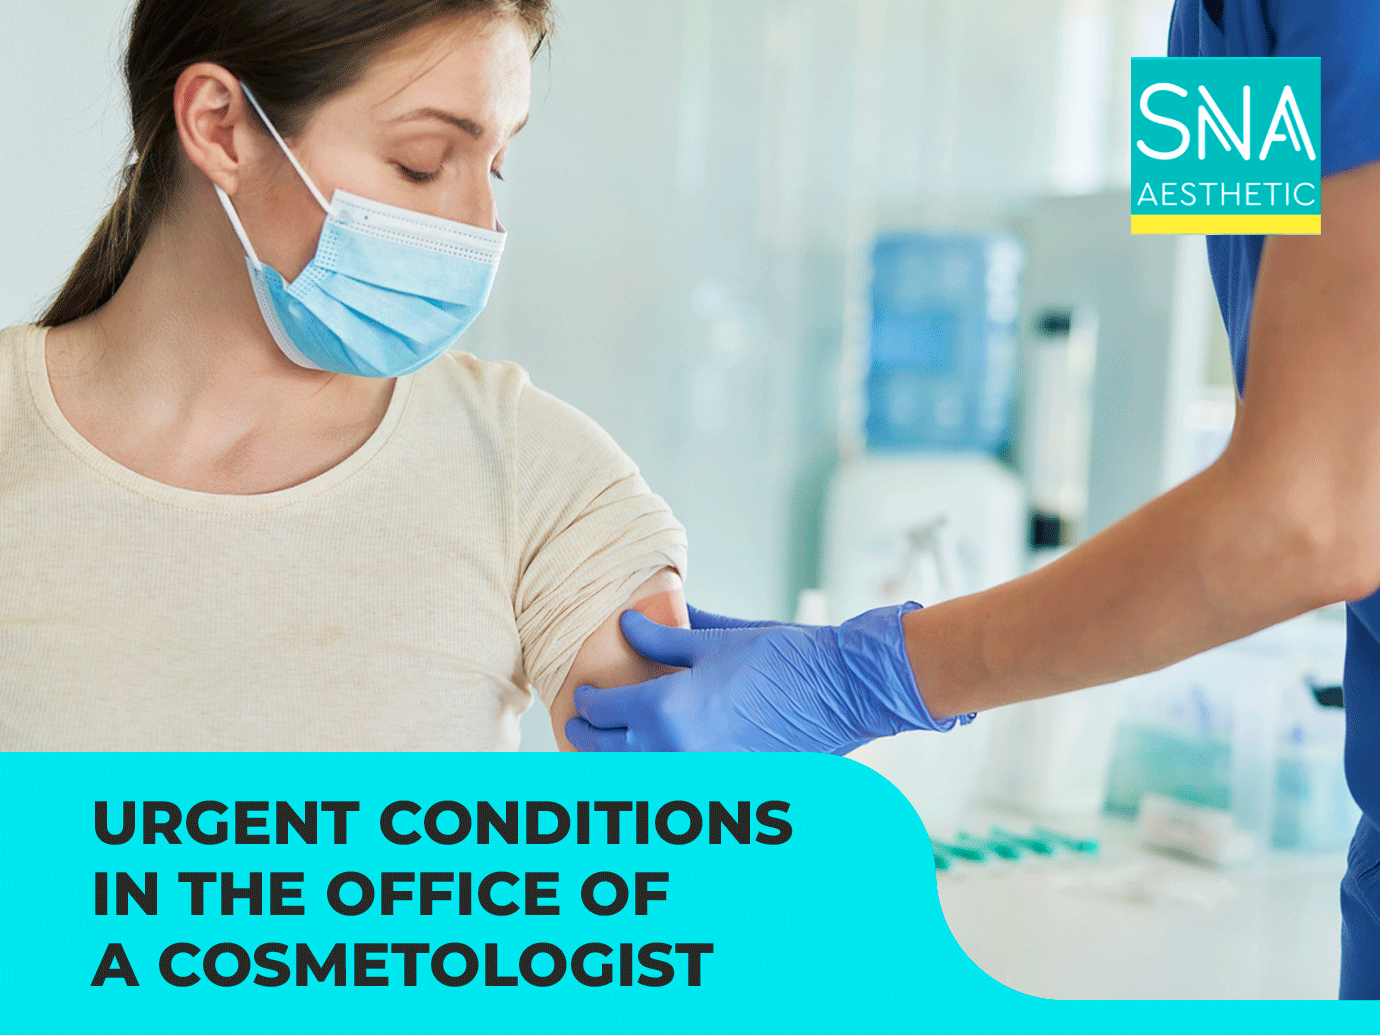 URGENT CONDITIONS IN THE OFFICE OF A COSMETOLOGIST